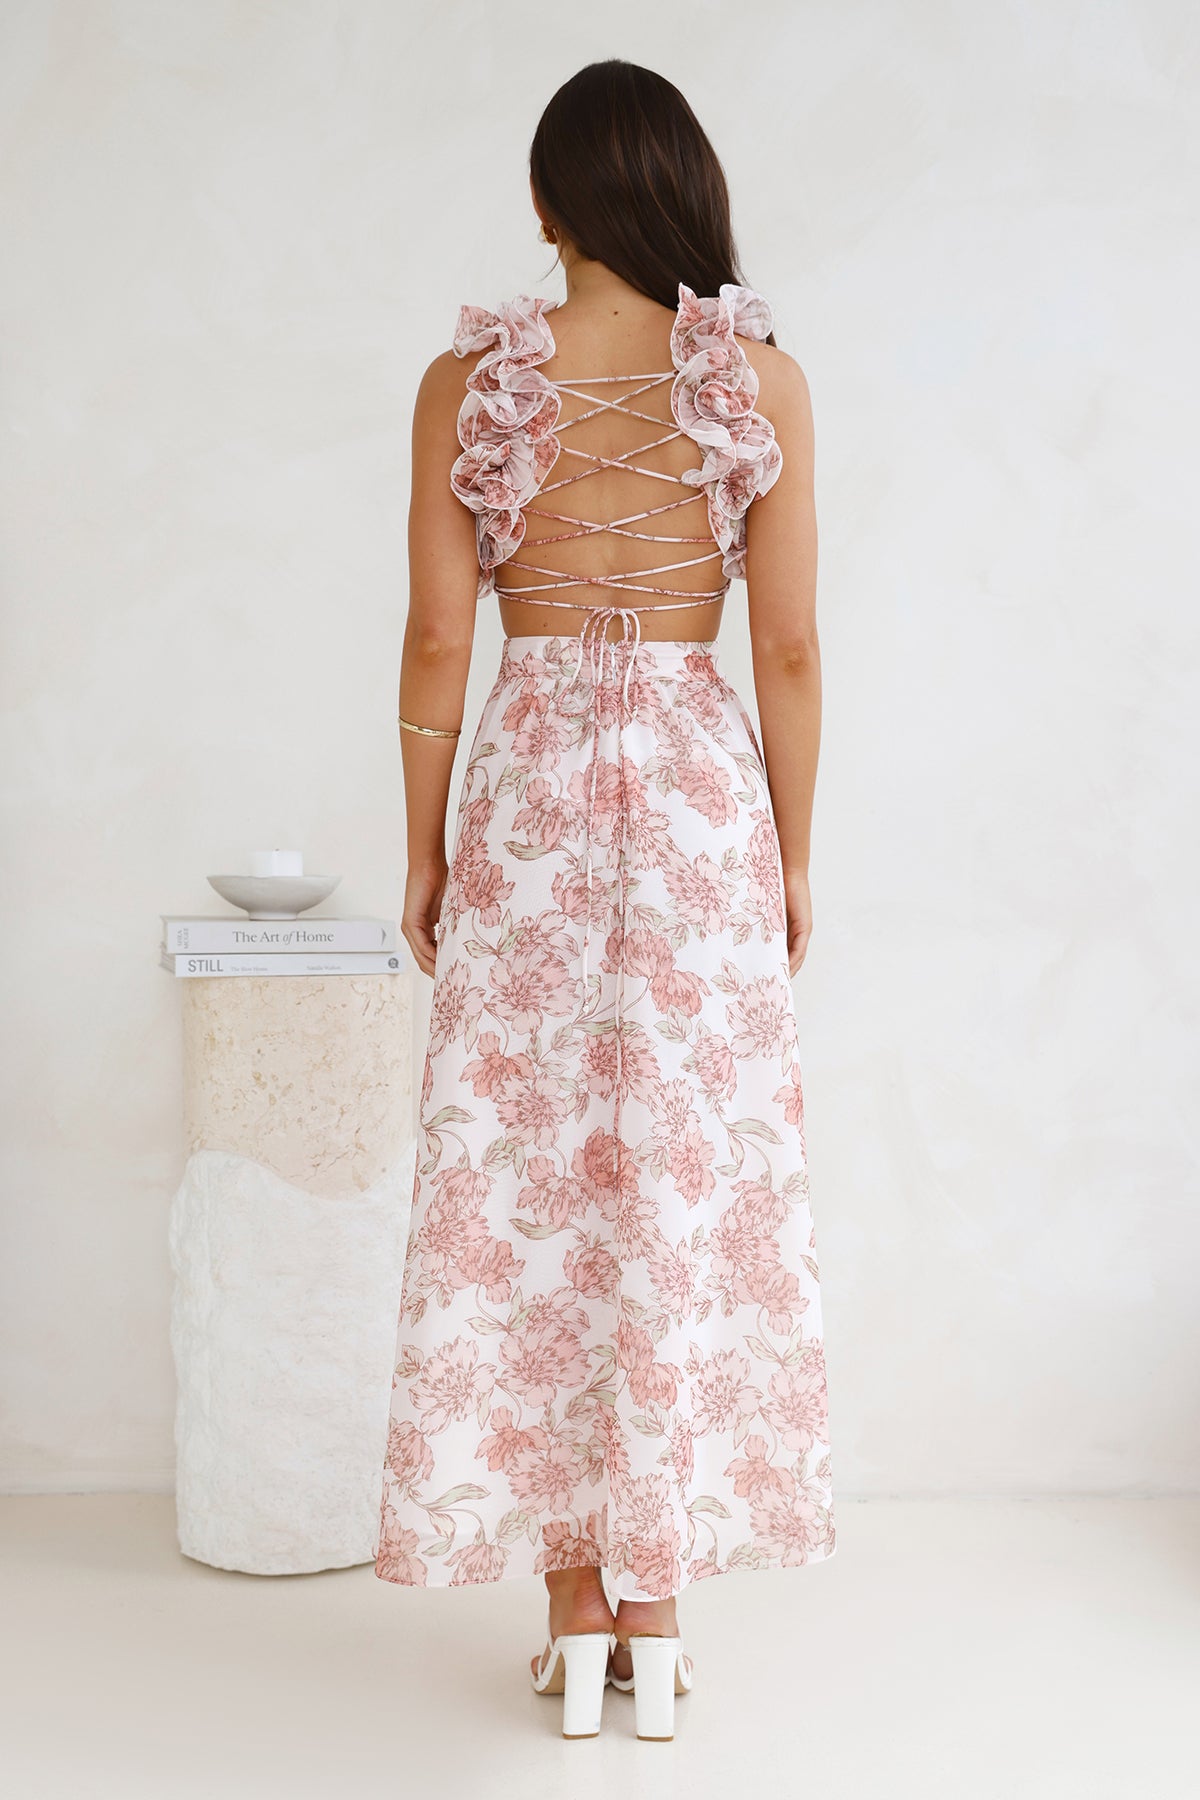 Shop Formal Dress - Extra Guest Maxi Dress Pink fourth image